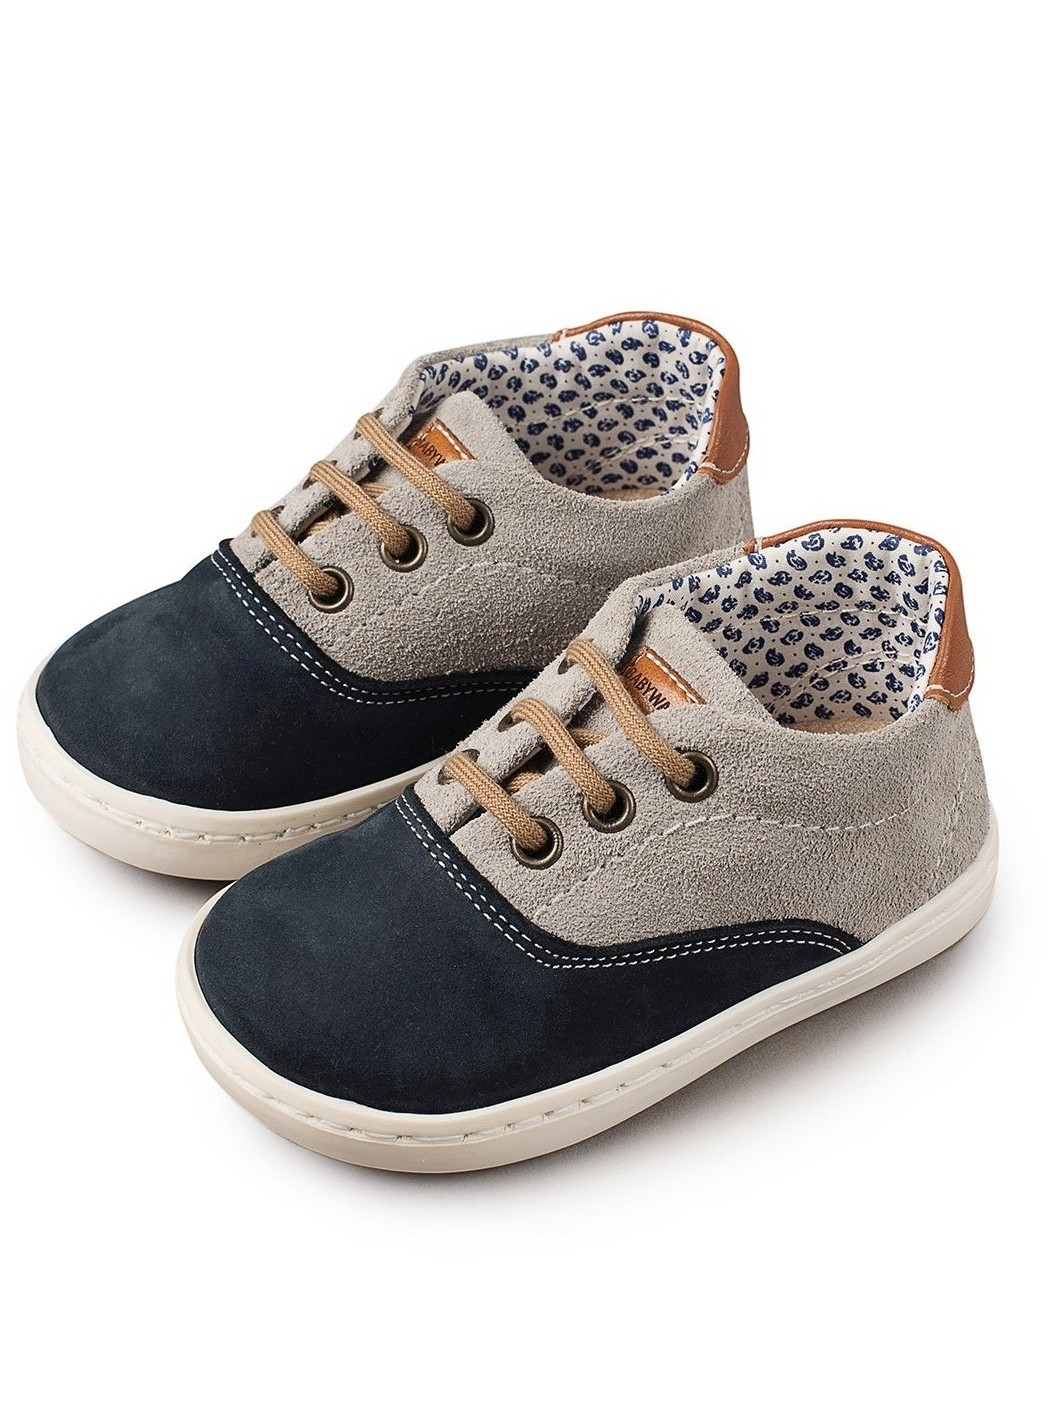 papoutsi-vaptisis-5067-mple_GREY-BABYWALKER-SHOES